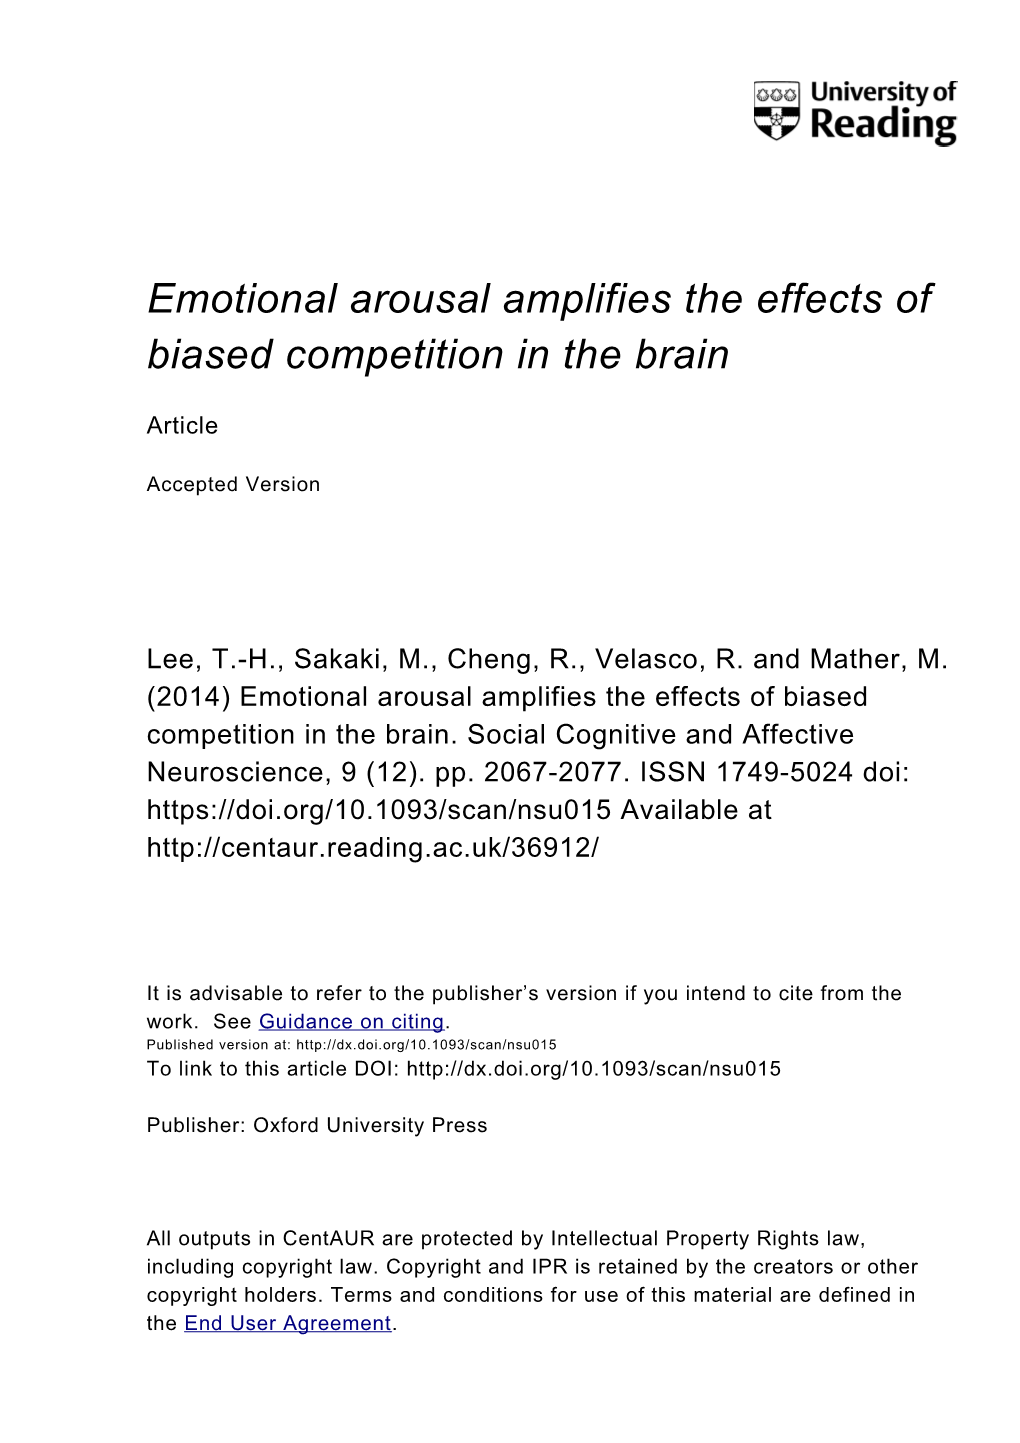 Emotional Arousal Amplifies the Effects of Biased Competition in the Brain